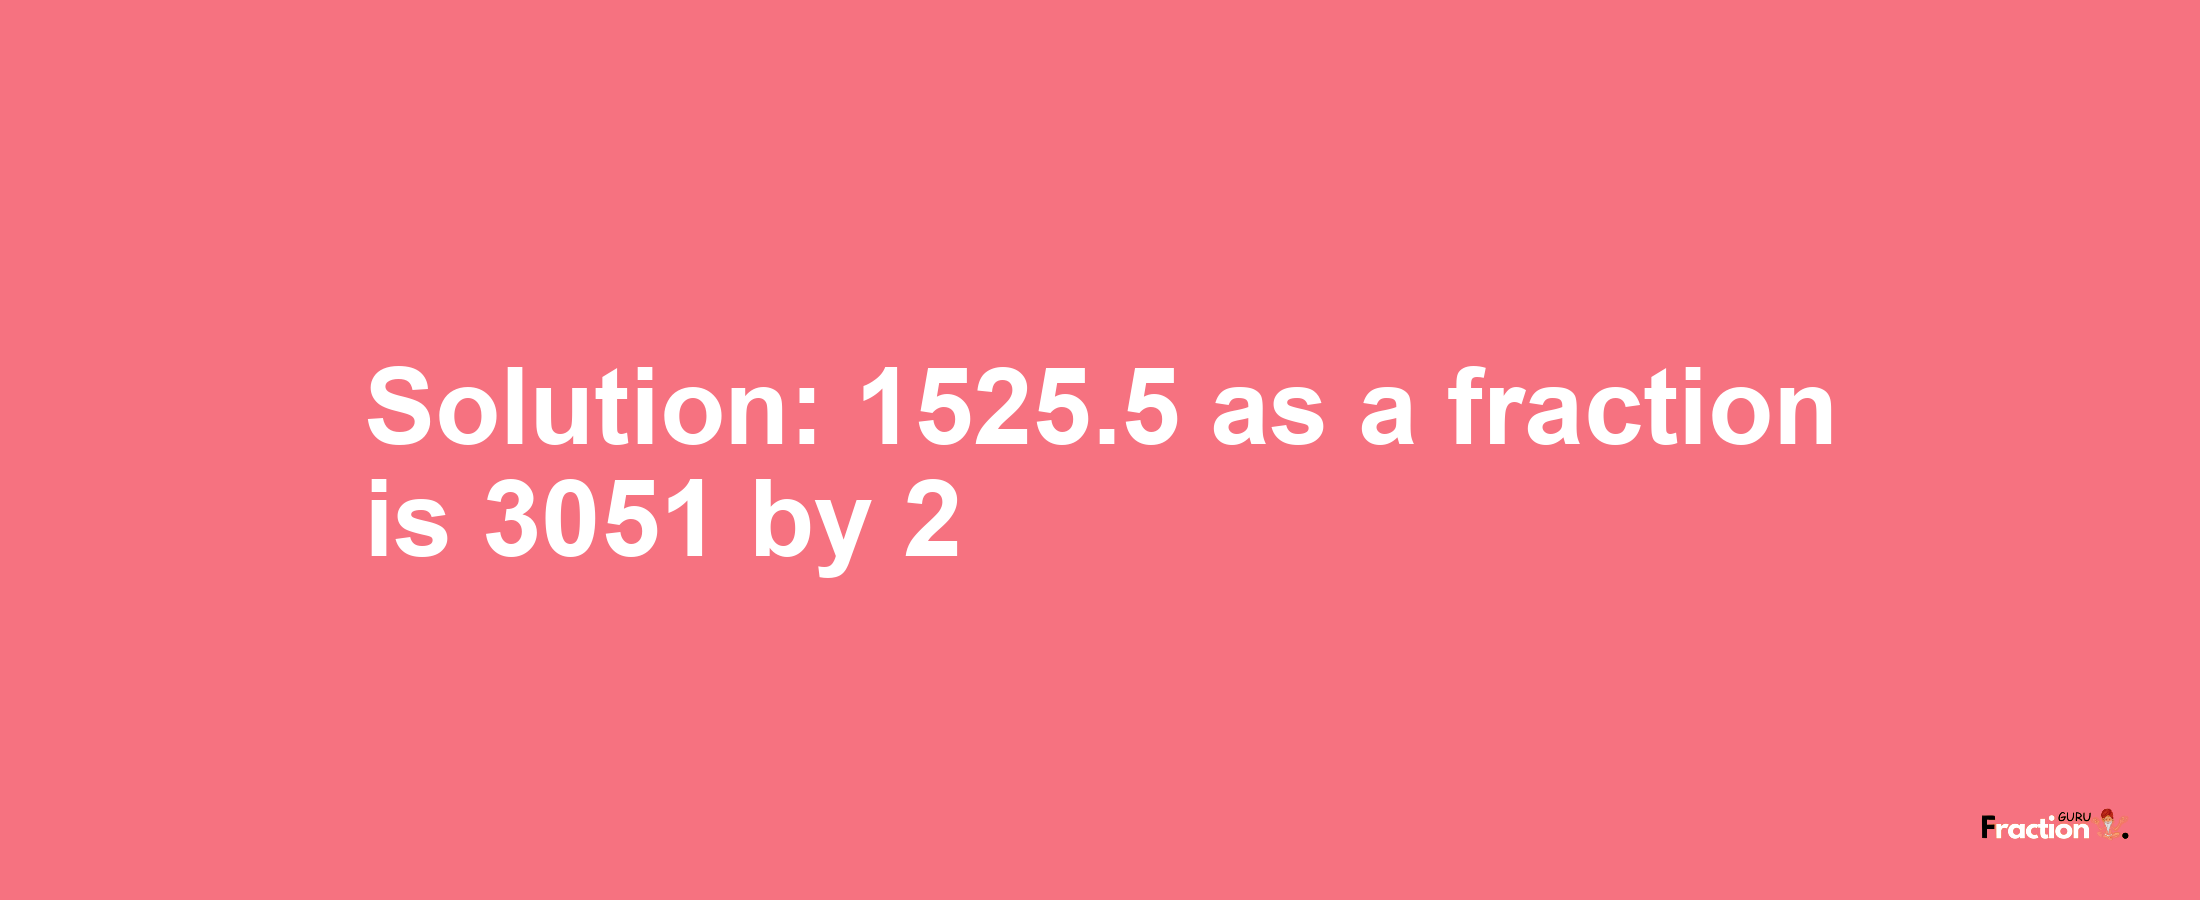 Solution:1525.5 as a fraction is 3051/2